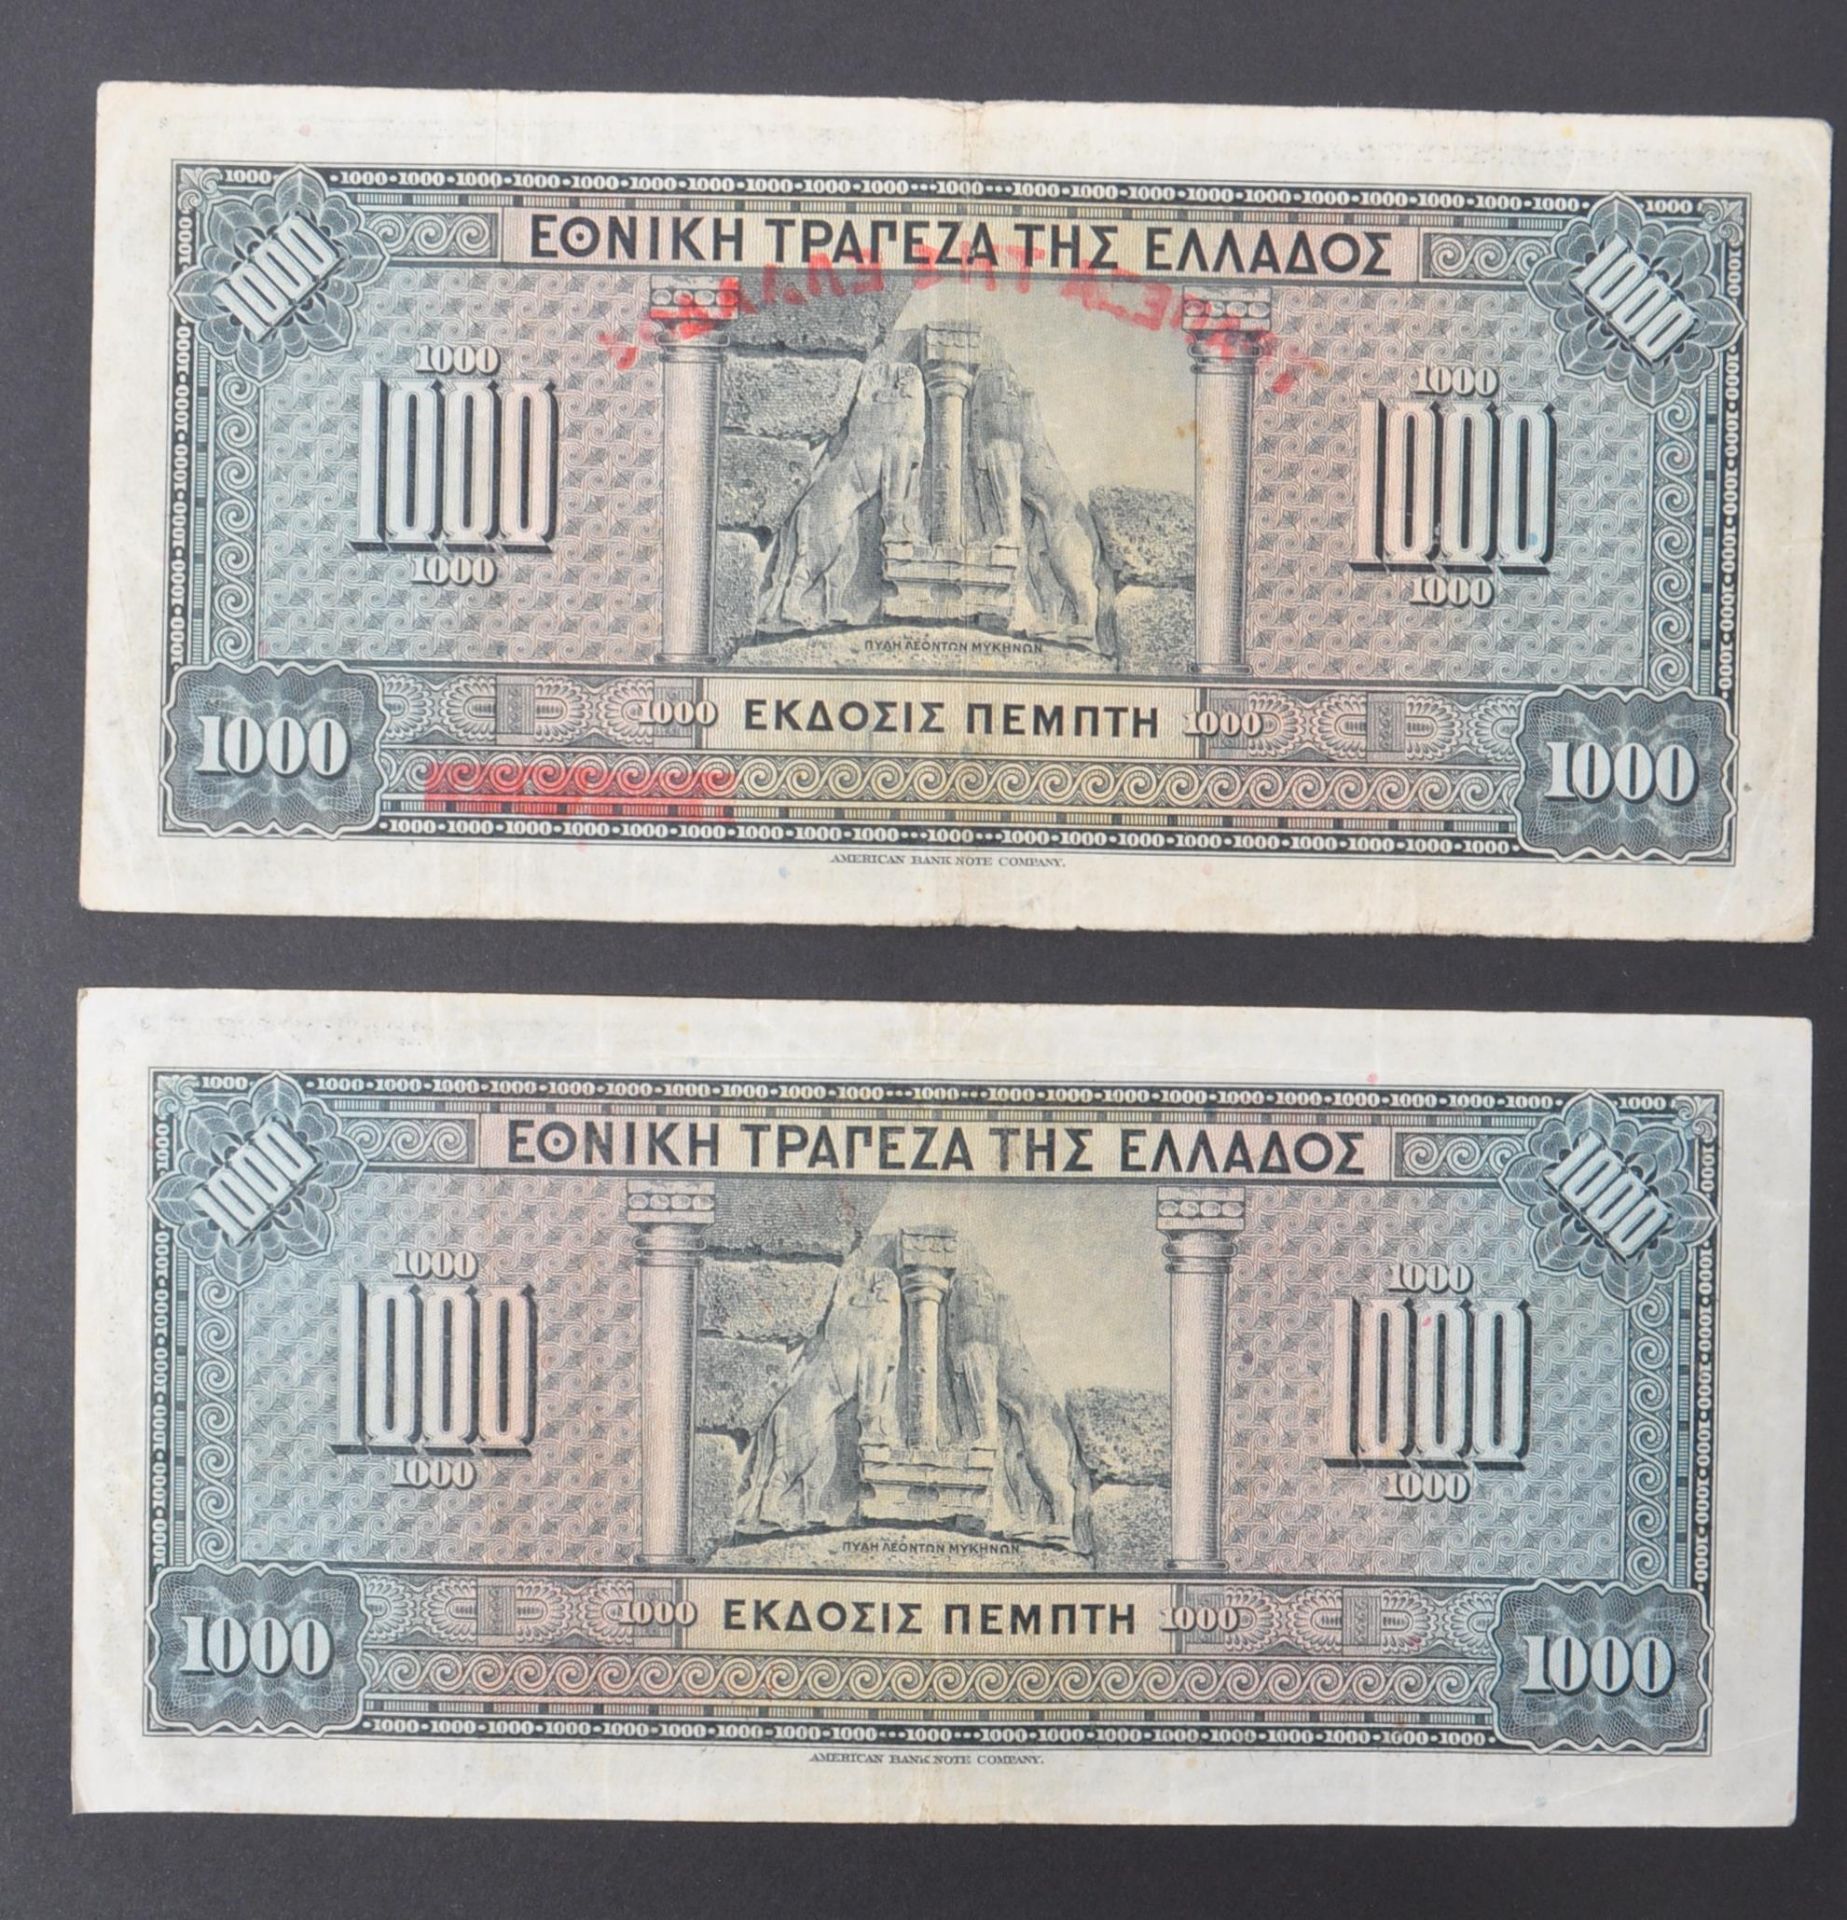 INTERNATIONAL MOSTLY UNCIRCULATED BANK NOTES - EUROPE - Image 2 of 30